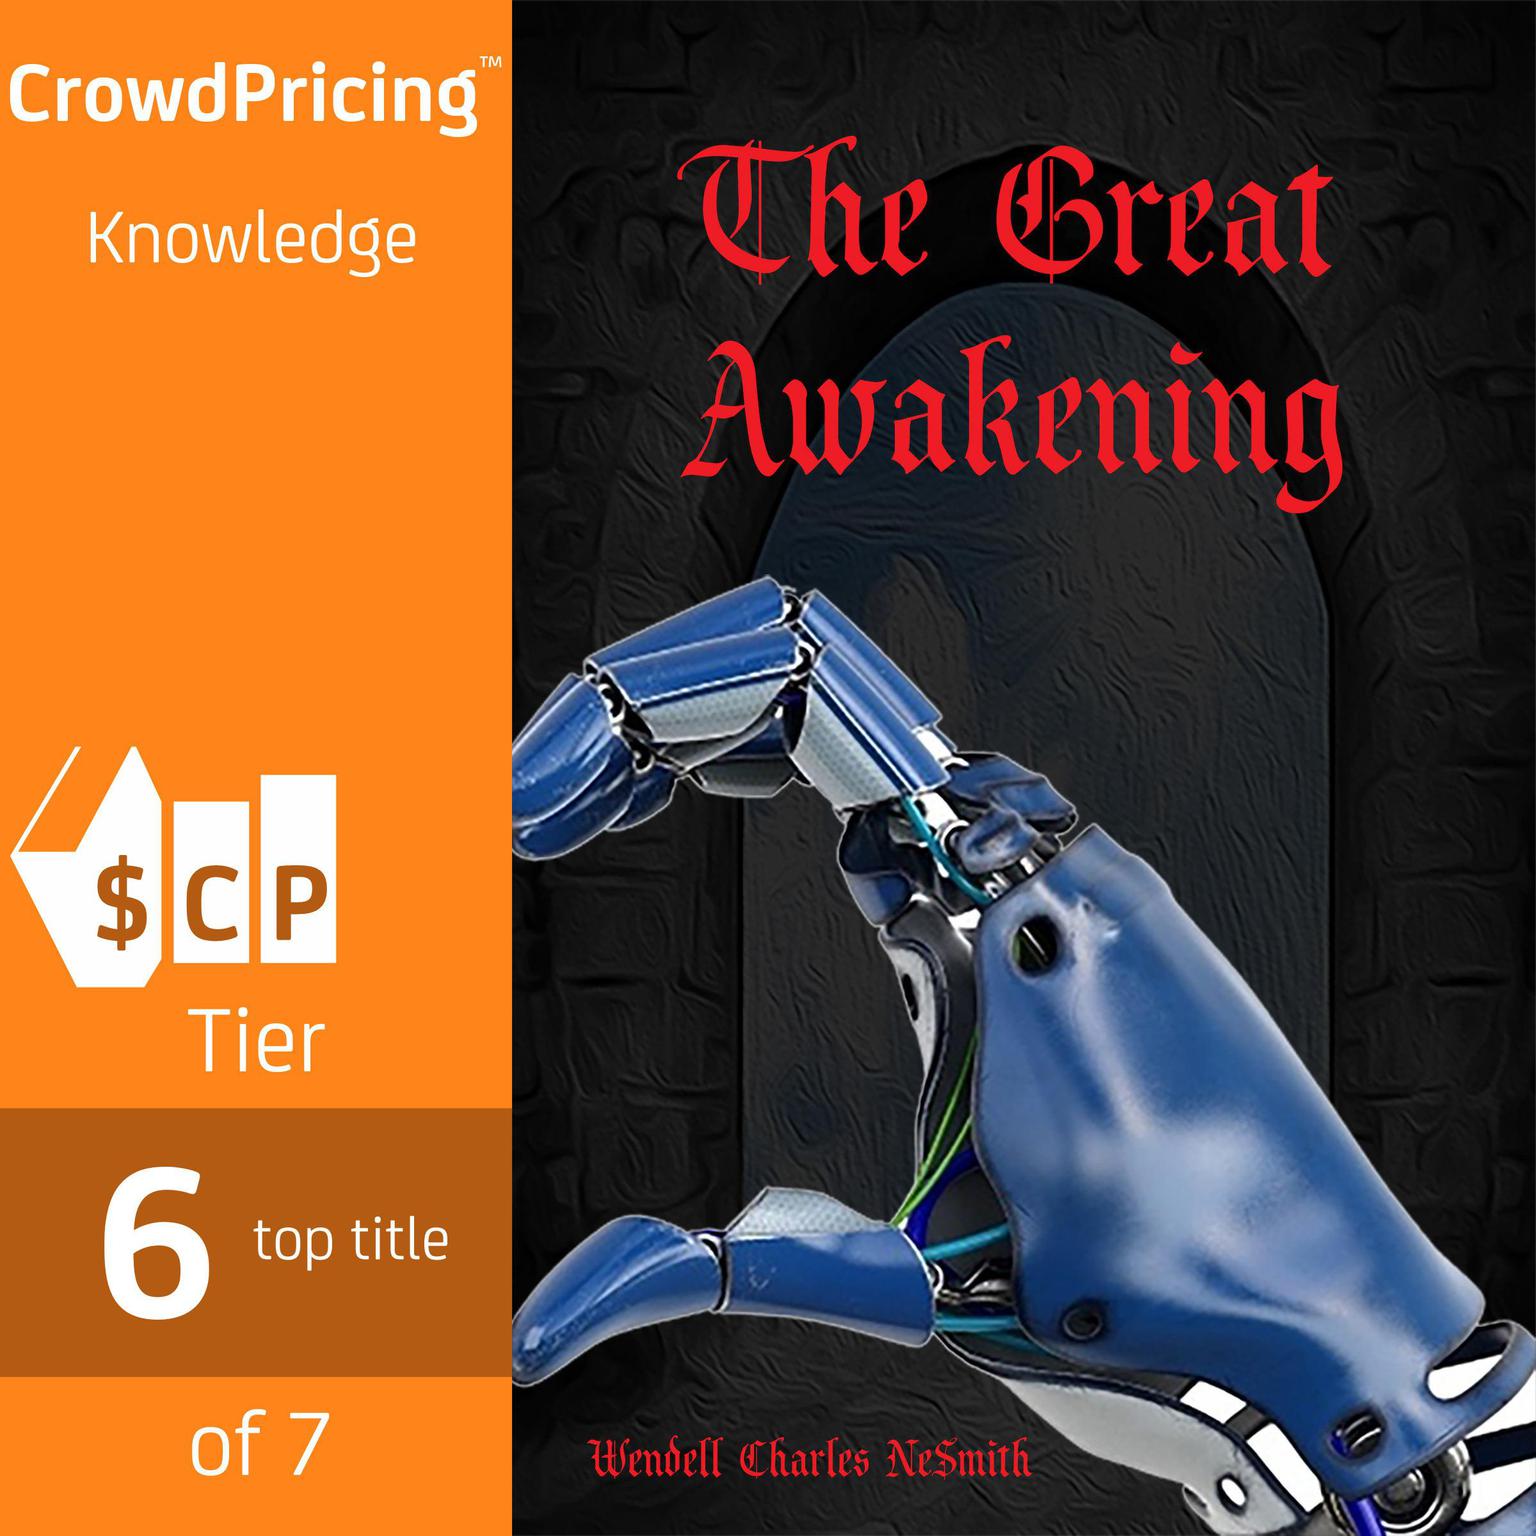 The Great Awakening Audiobook by Wendell Charles NeSmith — Listen Now